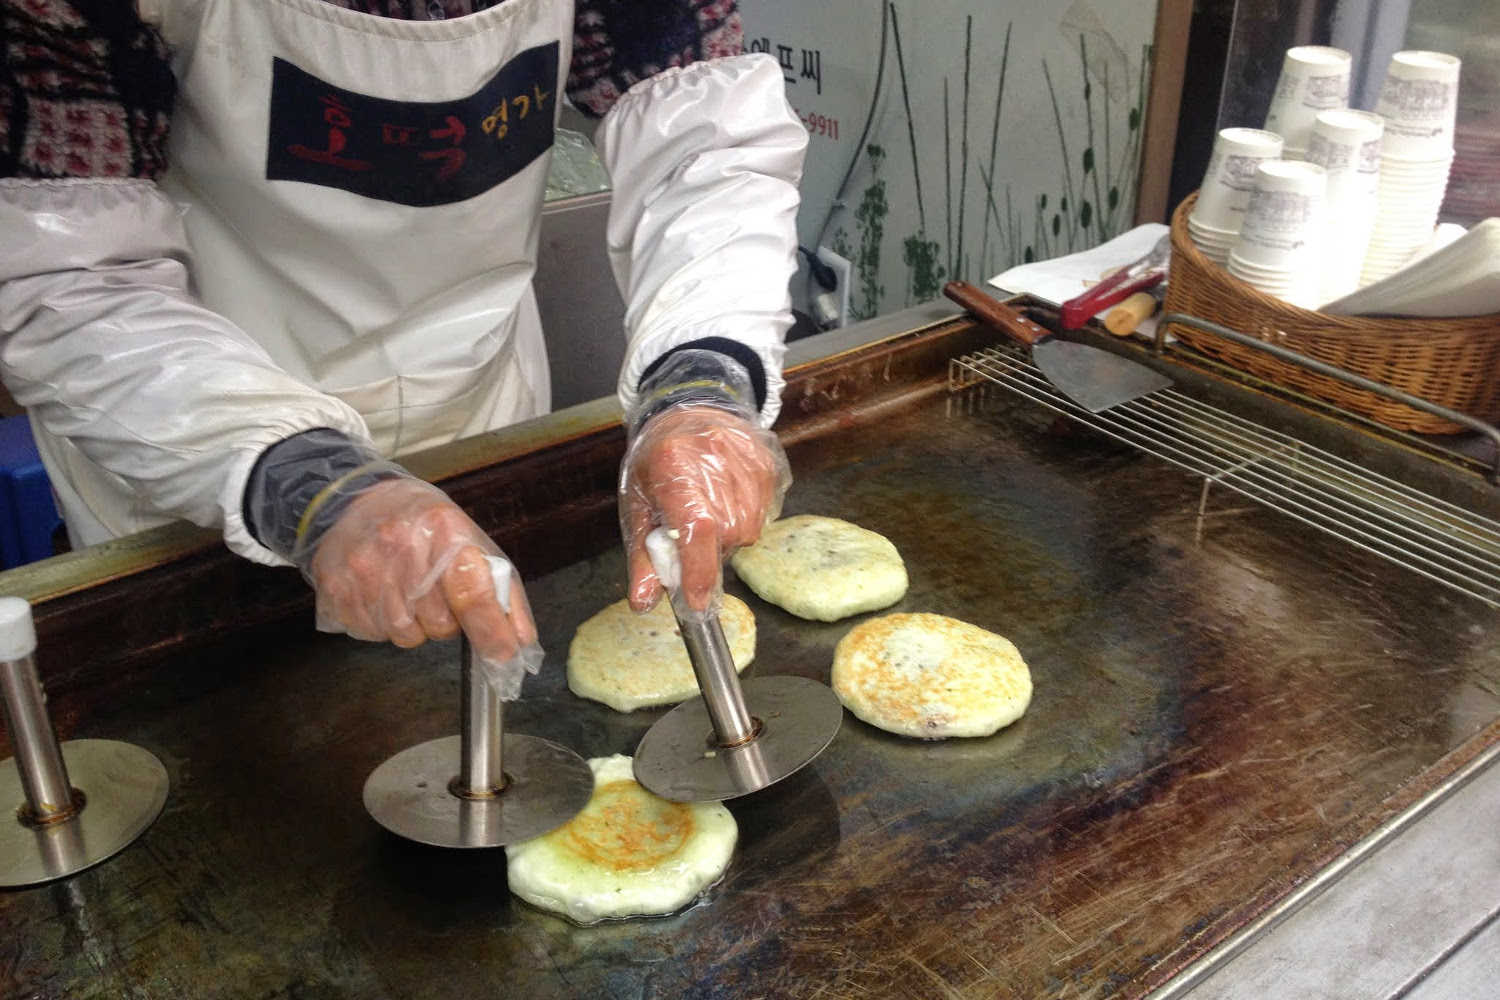 Hotteok: perfect pancakes filled with molten cinnamon and sugar. Image by Megan Eaves / Lonely Planet